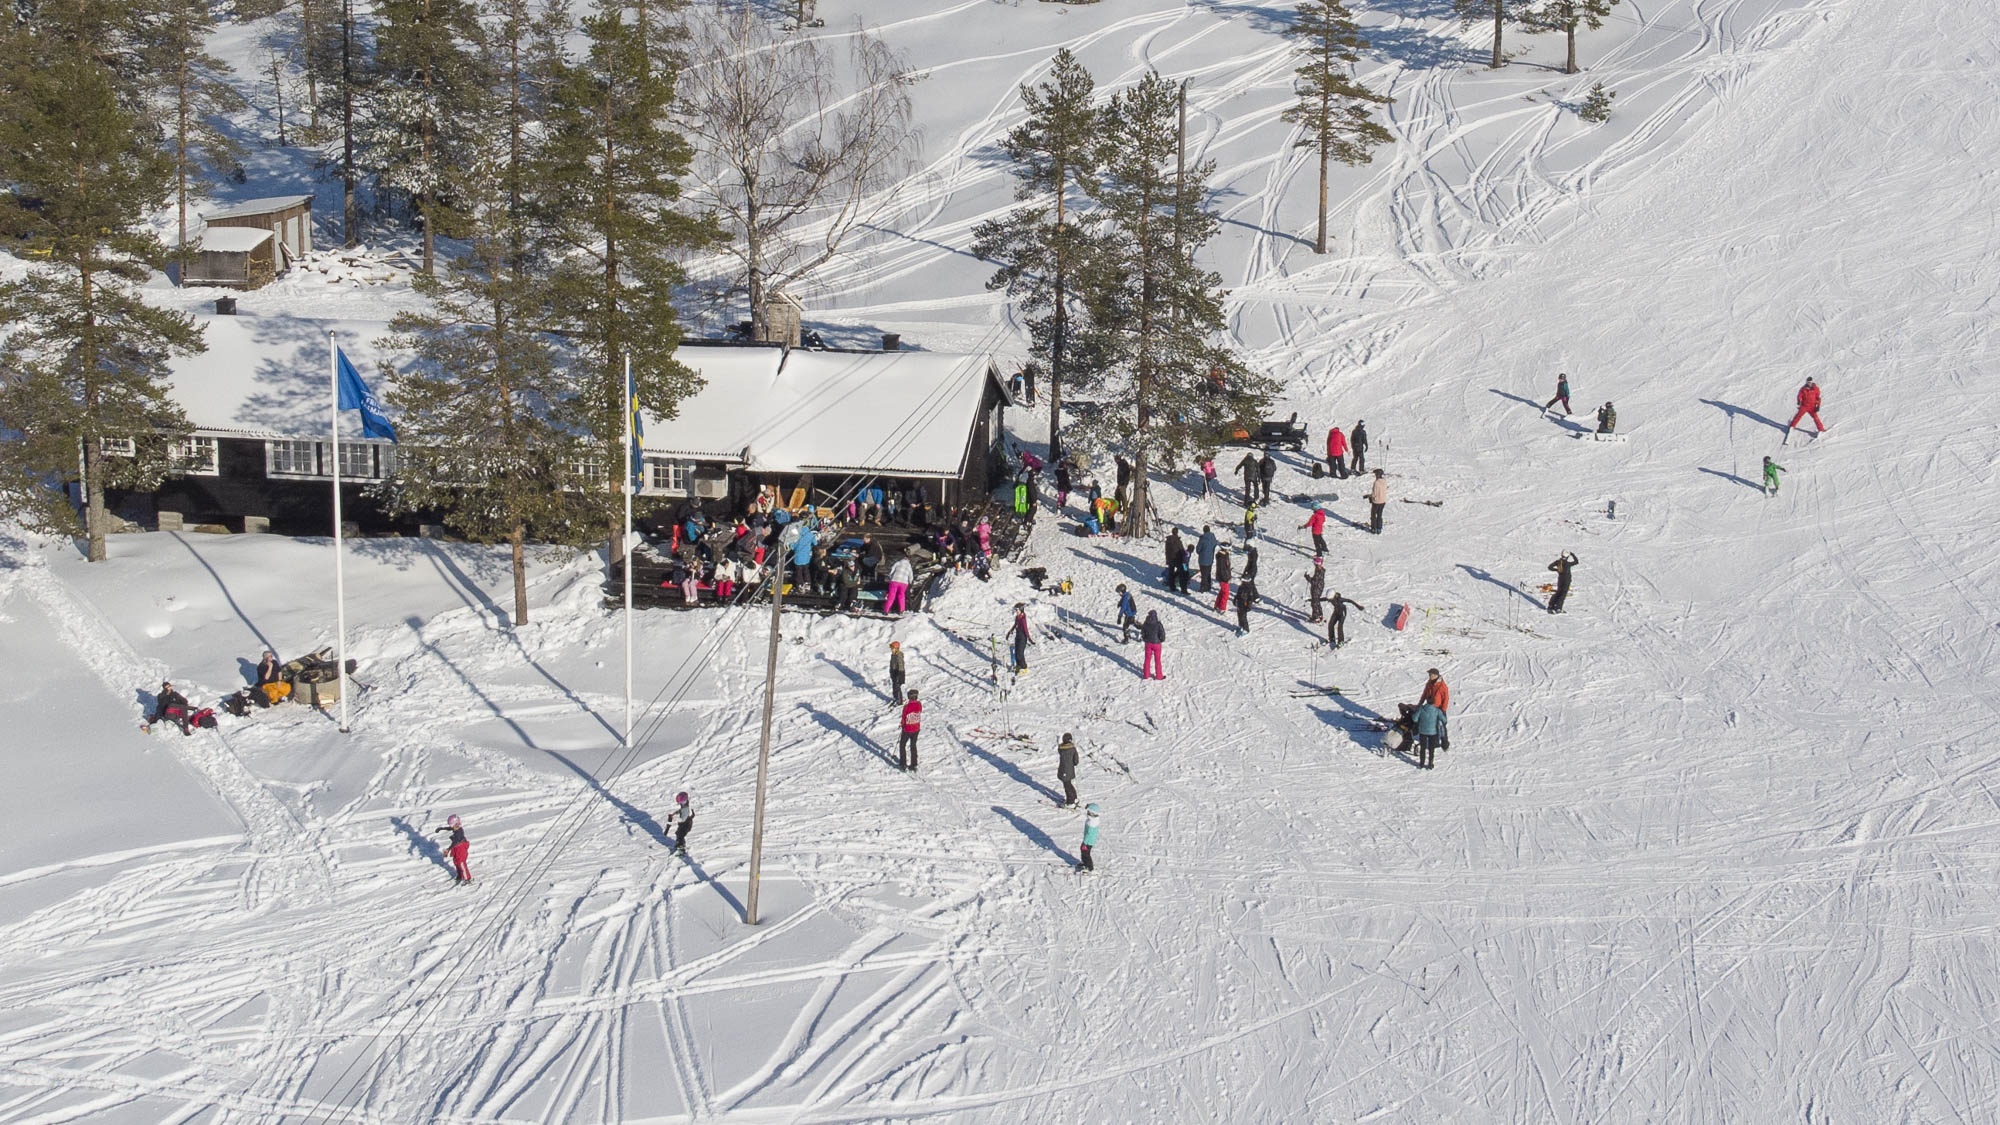 Free downhill skiing for all children and adults